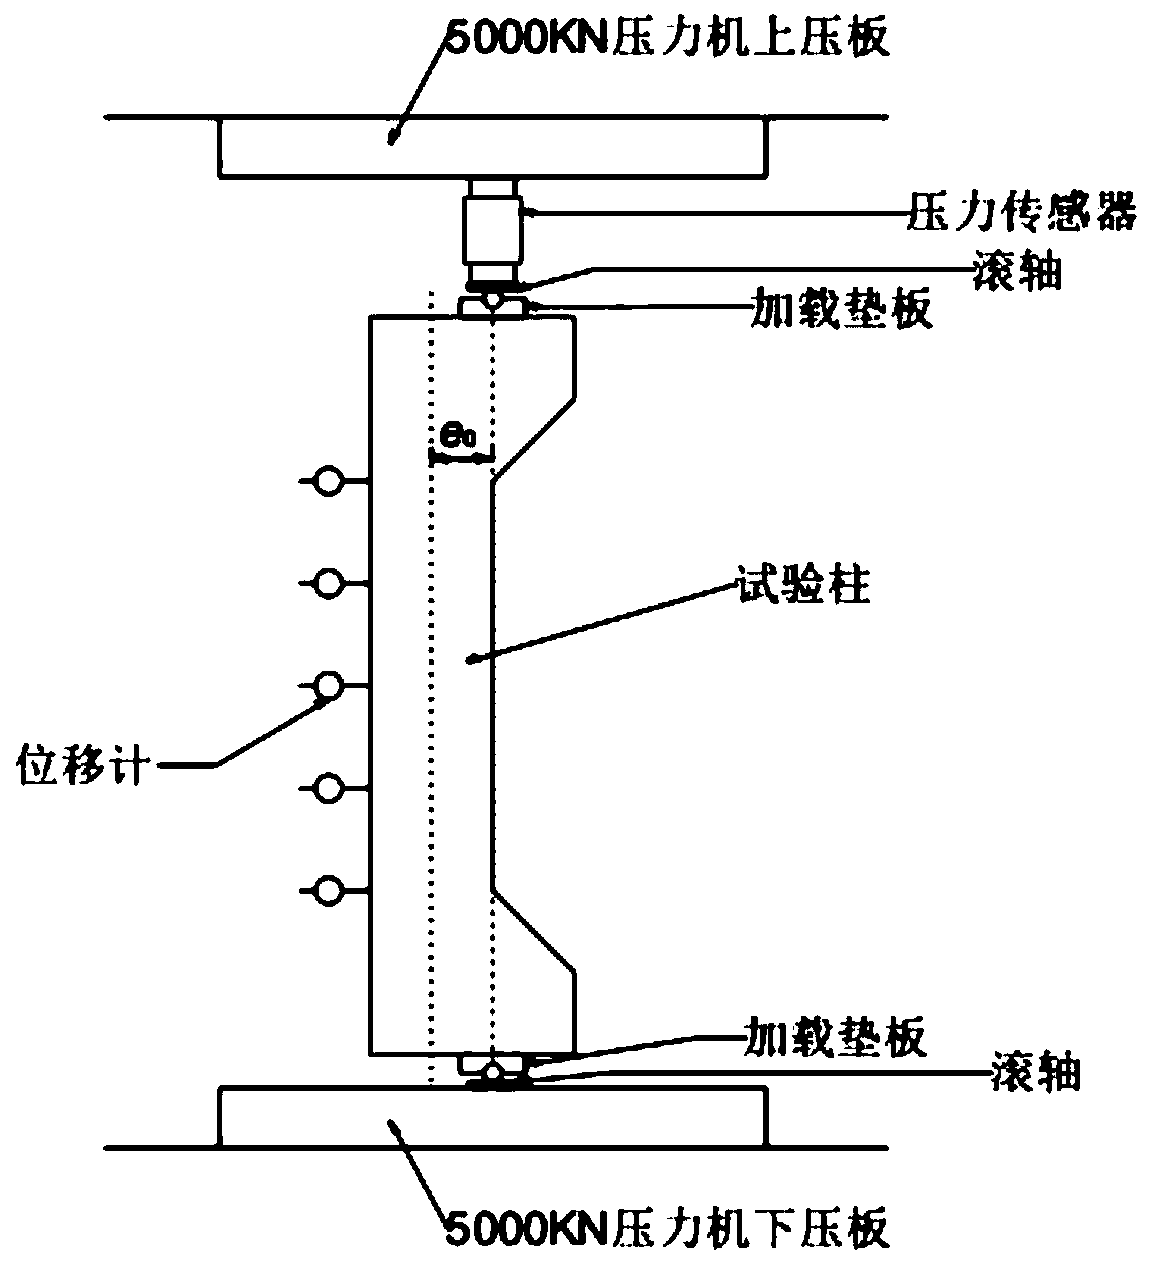 Analysis method for mechanical performance of stainless steel reinforced concrete column